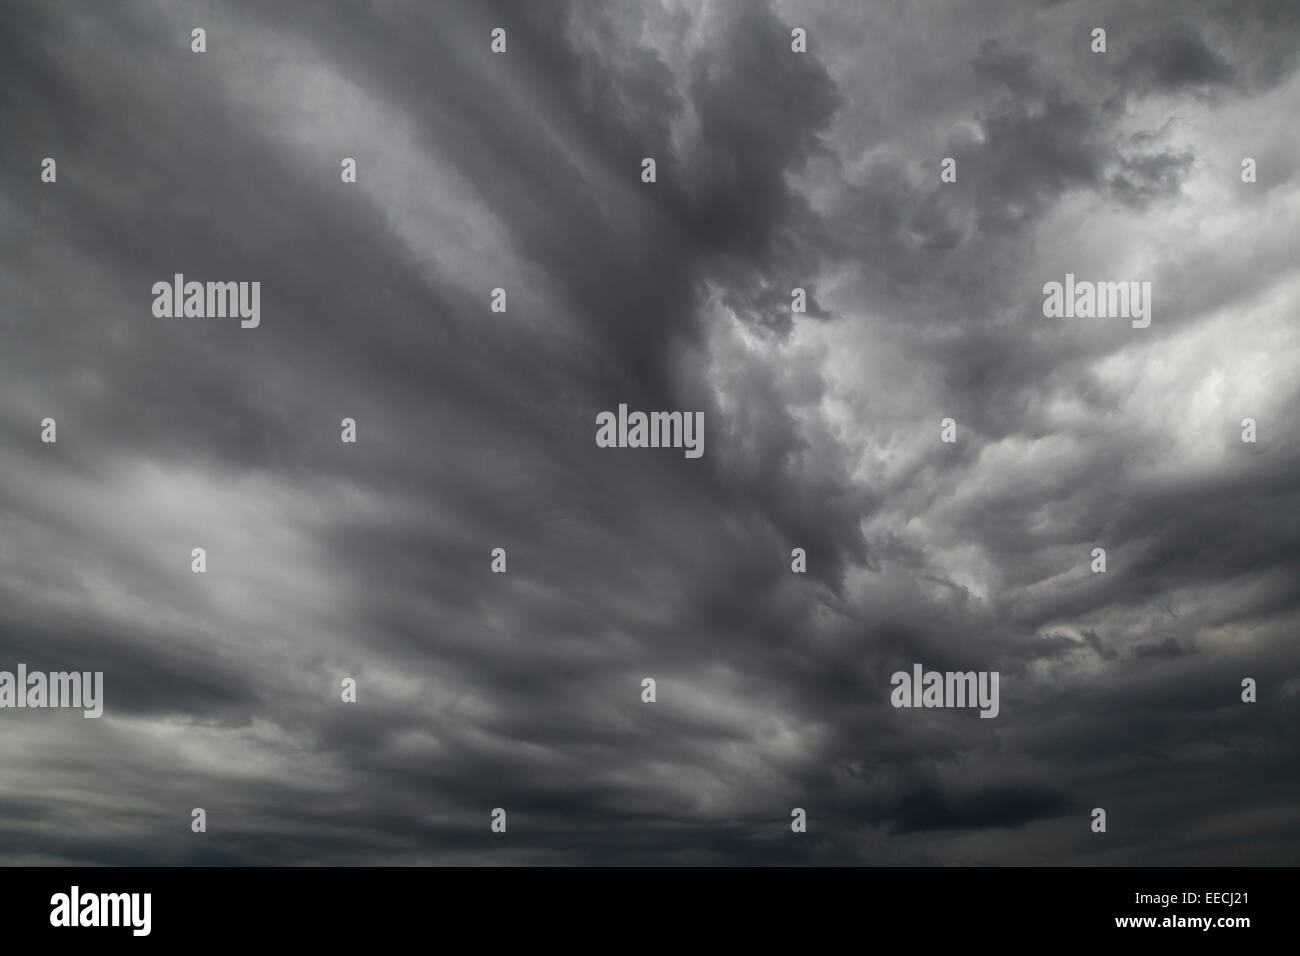 Swirling Storm Clouds - Horizontal Stock Photo